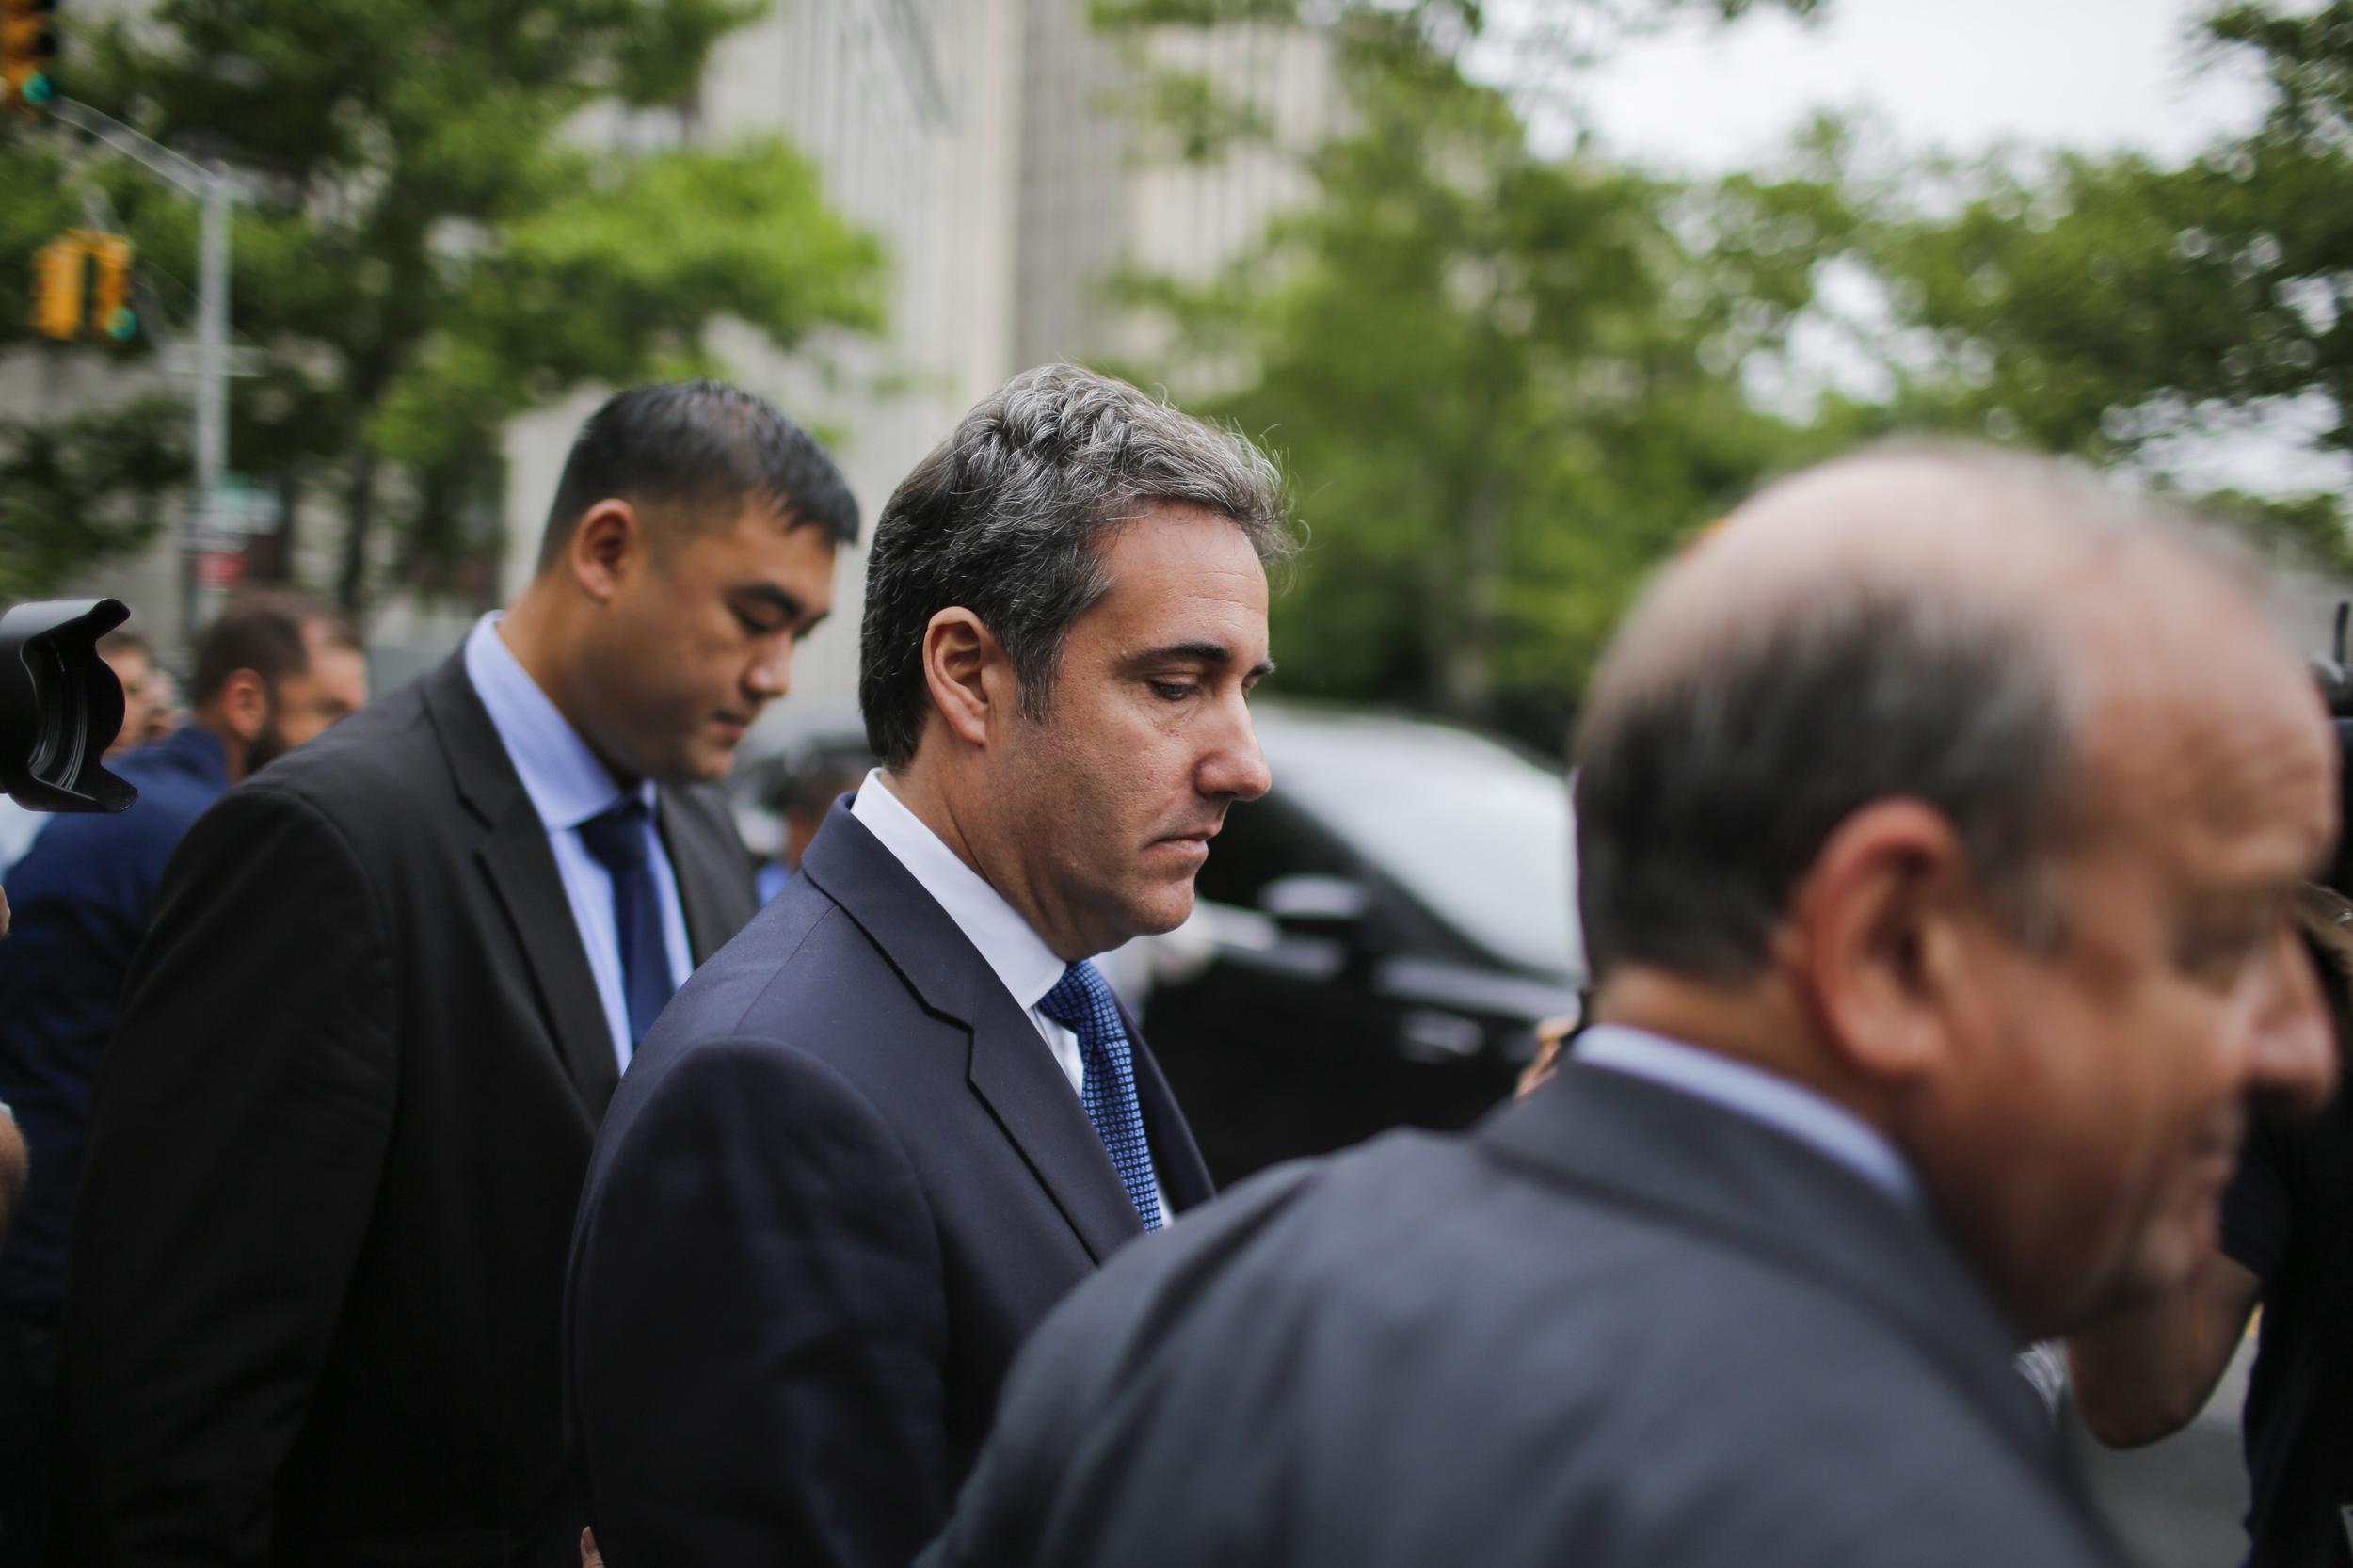 Michael Cohen, (C) former personal lawyer and confidante for President Donald Trump, exits the United States District Court Southern District of New York